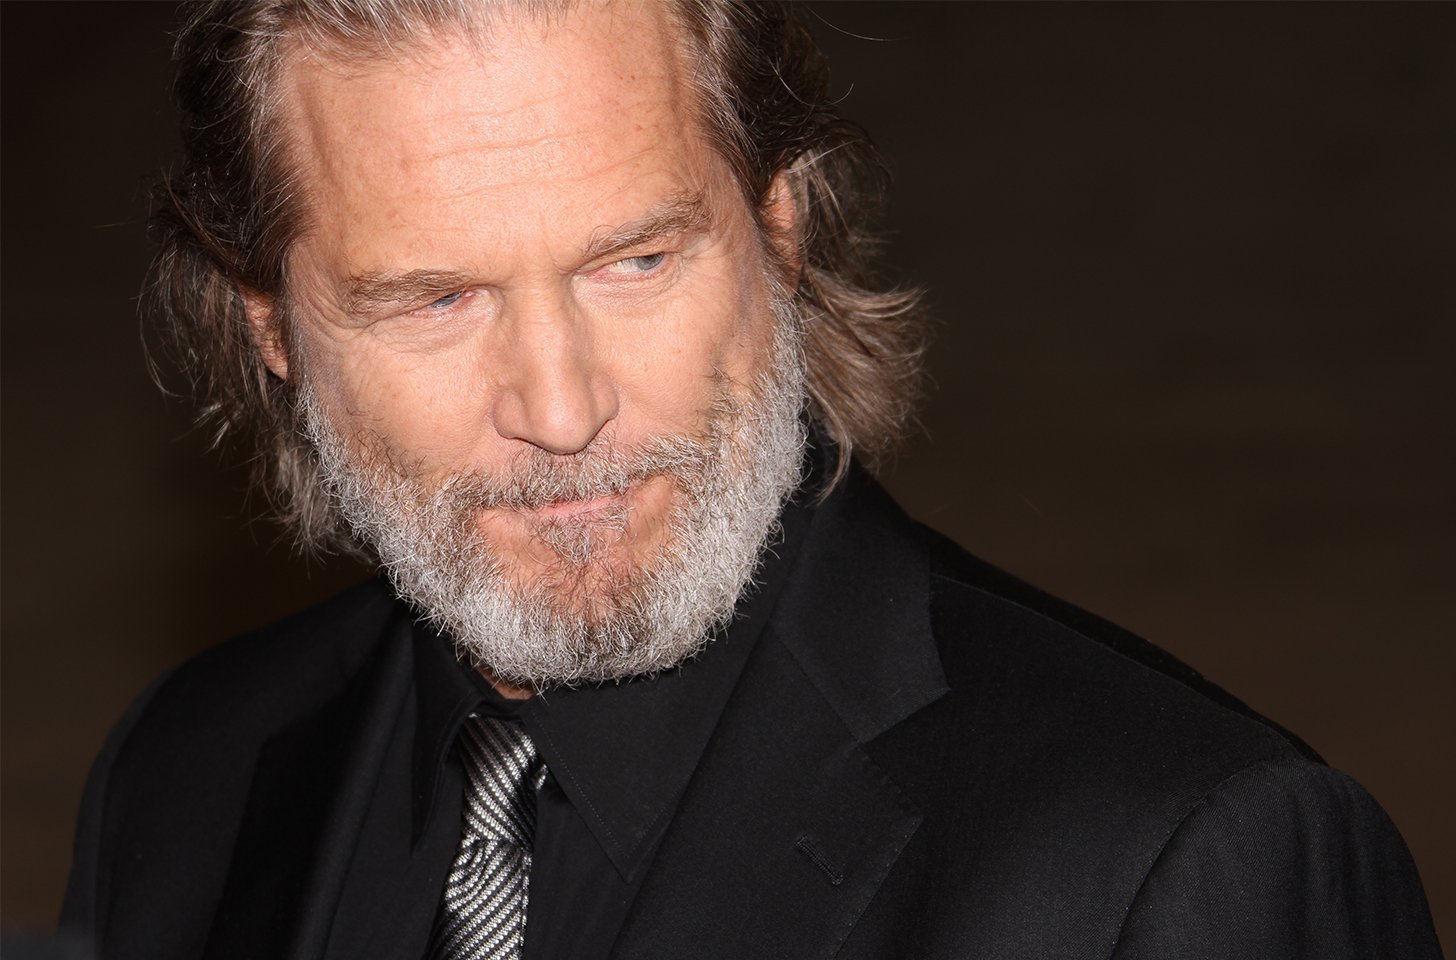 Iron Man Star Jeff Bridges Recent Health Updates More Significant Than You May Realize